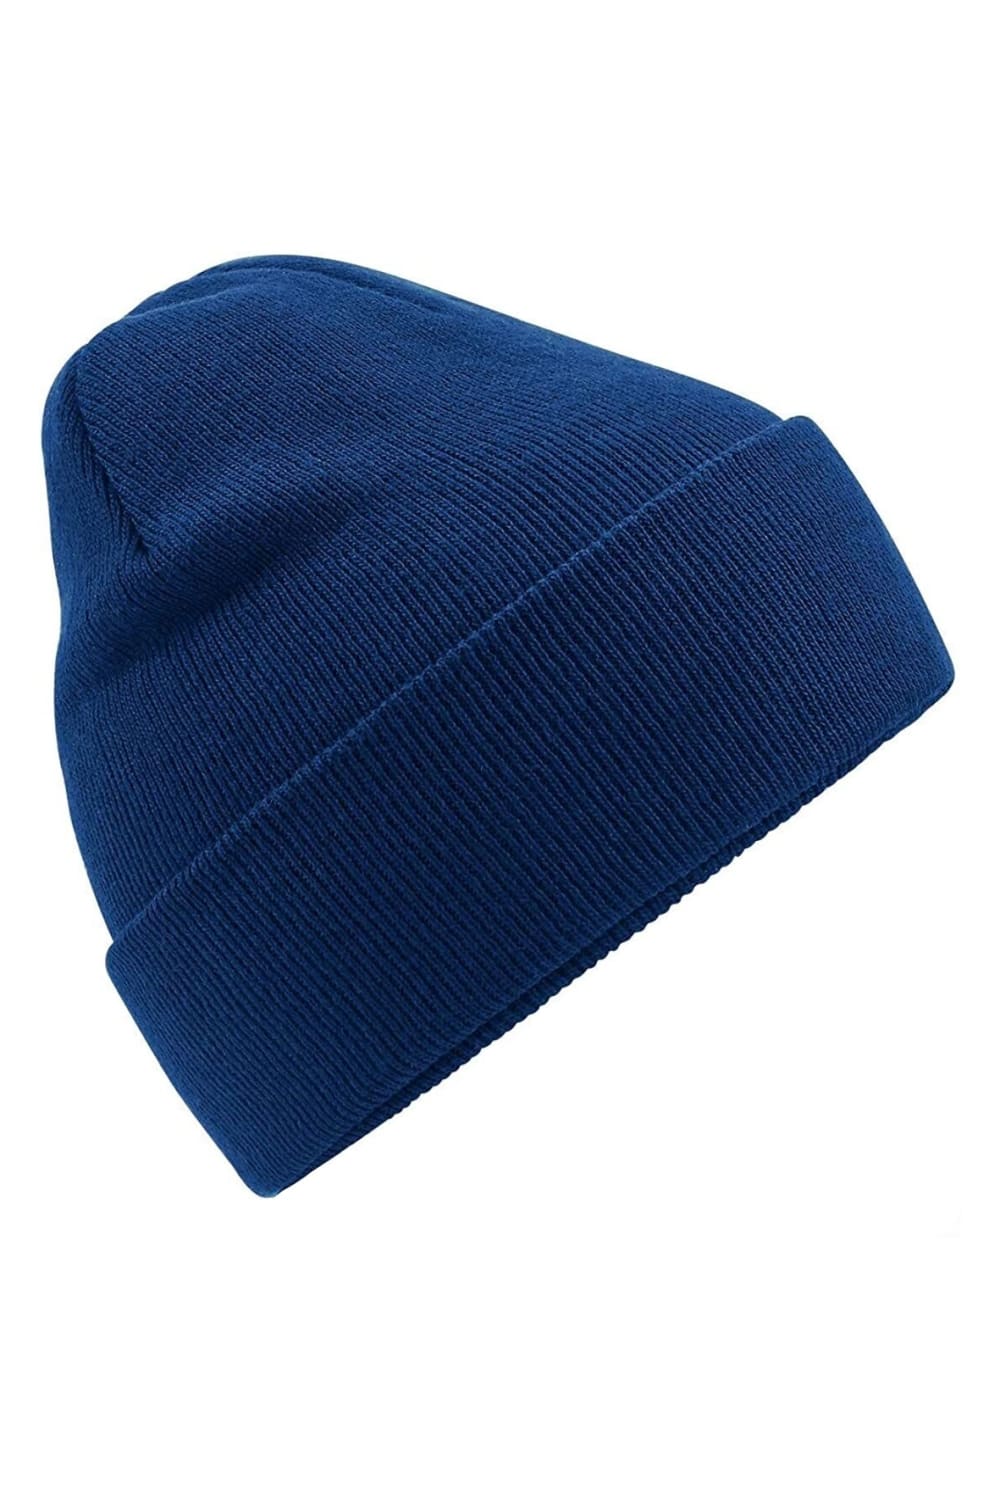 Beechfield Unisex Adult Original Recycled Beanie (French Navy)